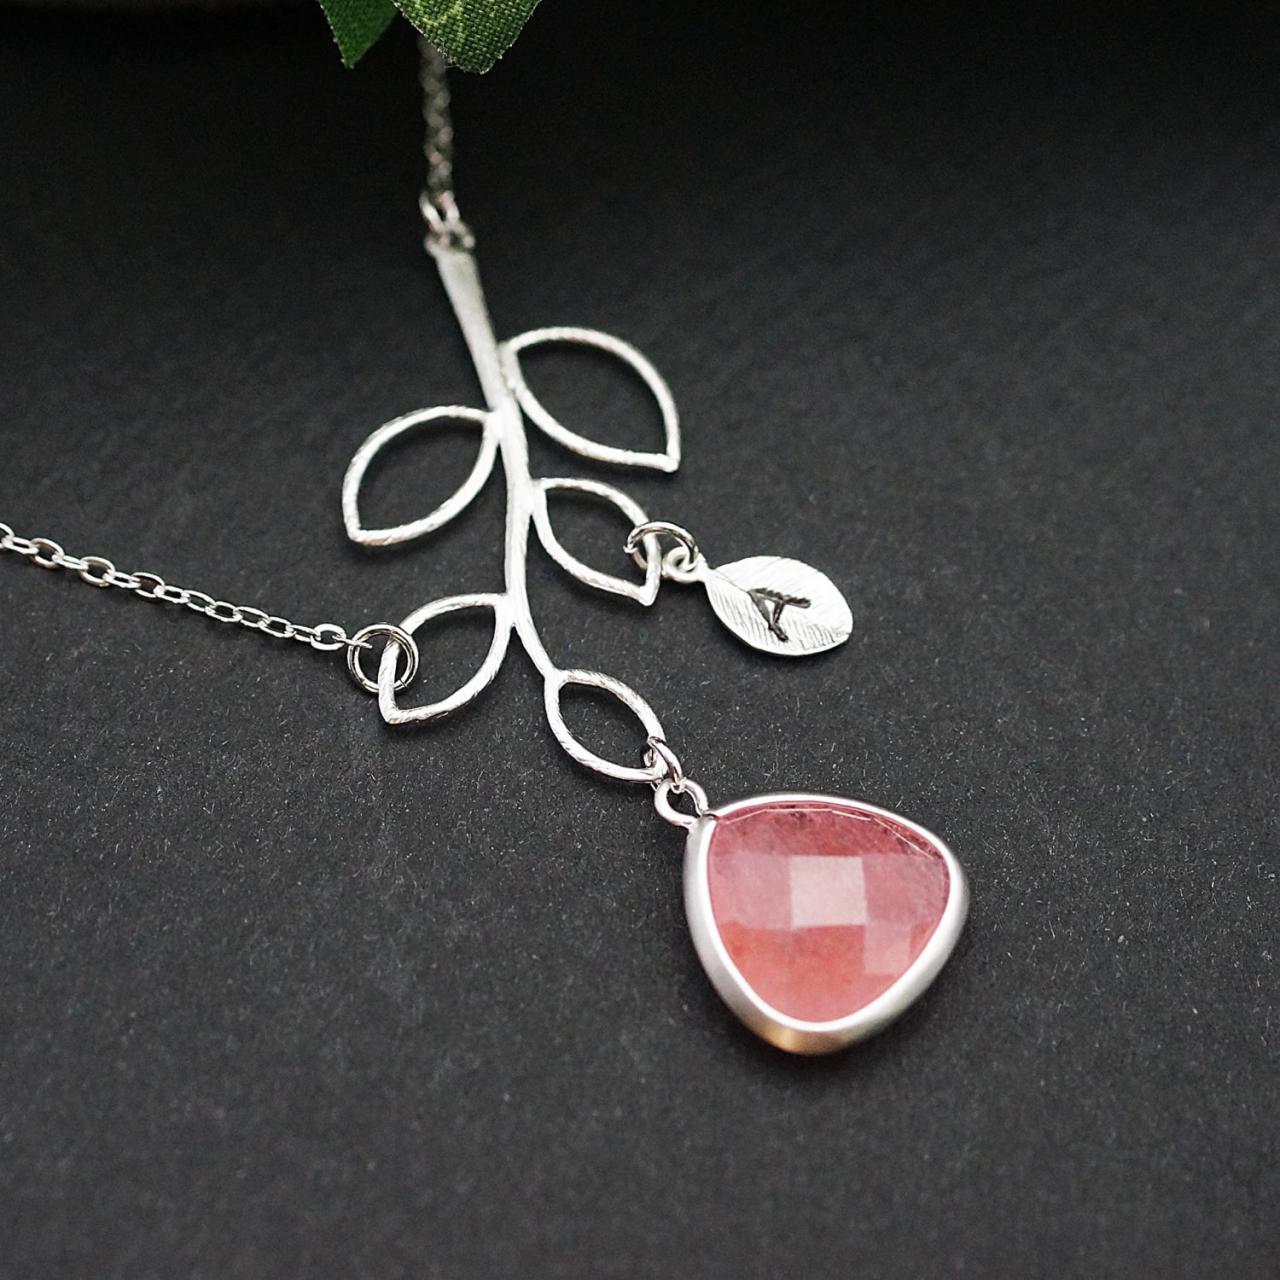 Personalized Necklace Bridesmaid Gift Simple Leaf With Baby Pink Jade Pendant And Initial Leaf Charm Necklace , For Her. Gift For Her